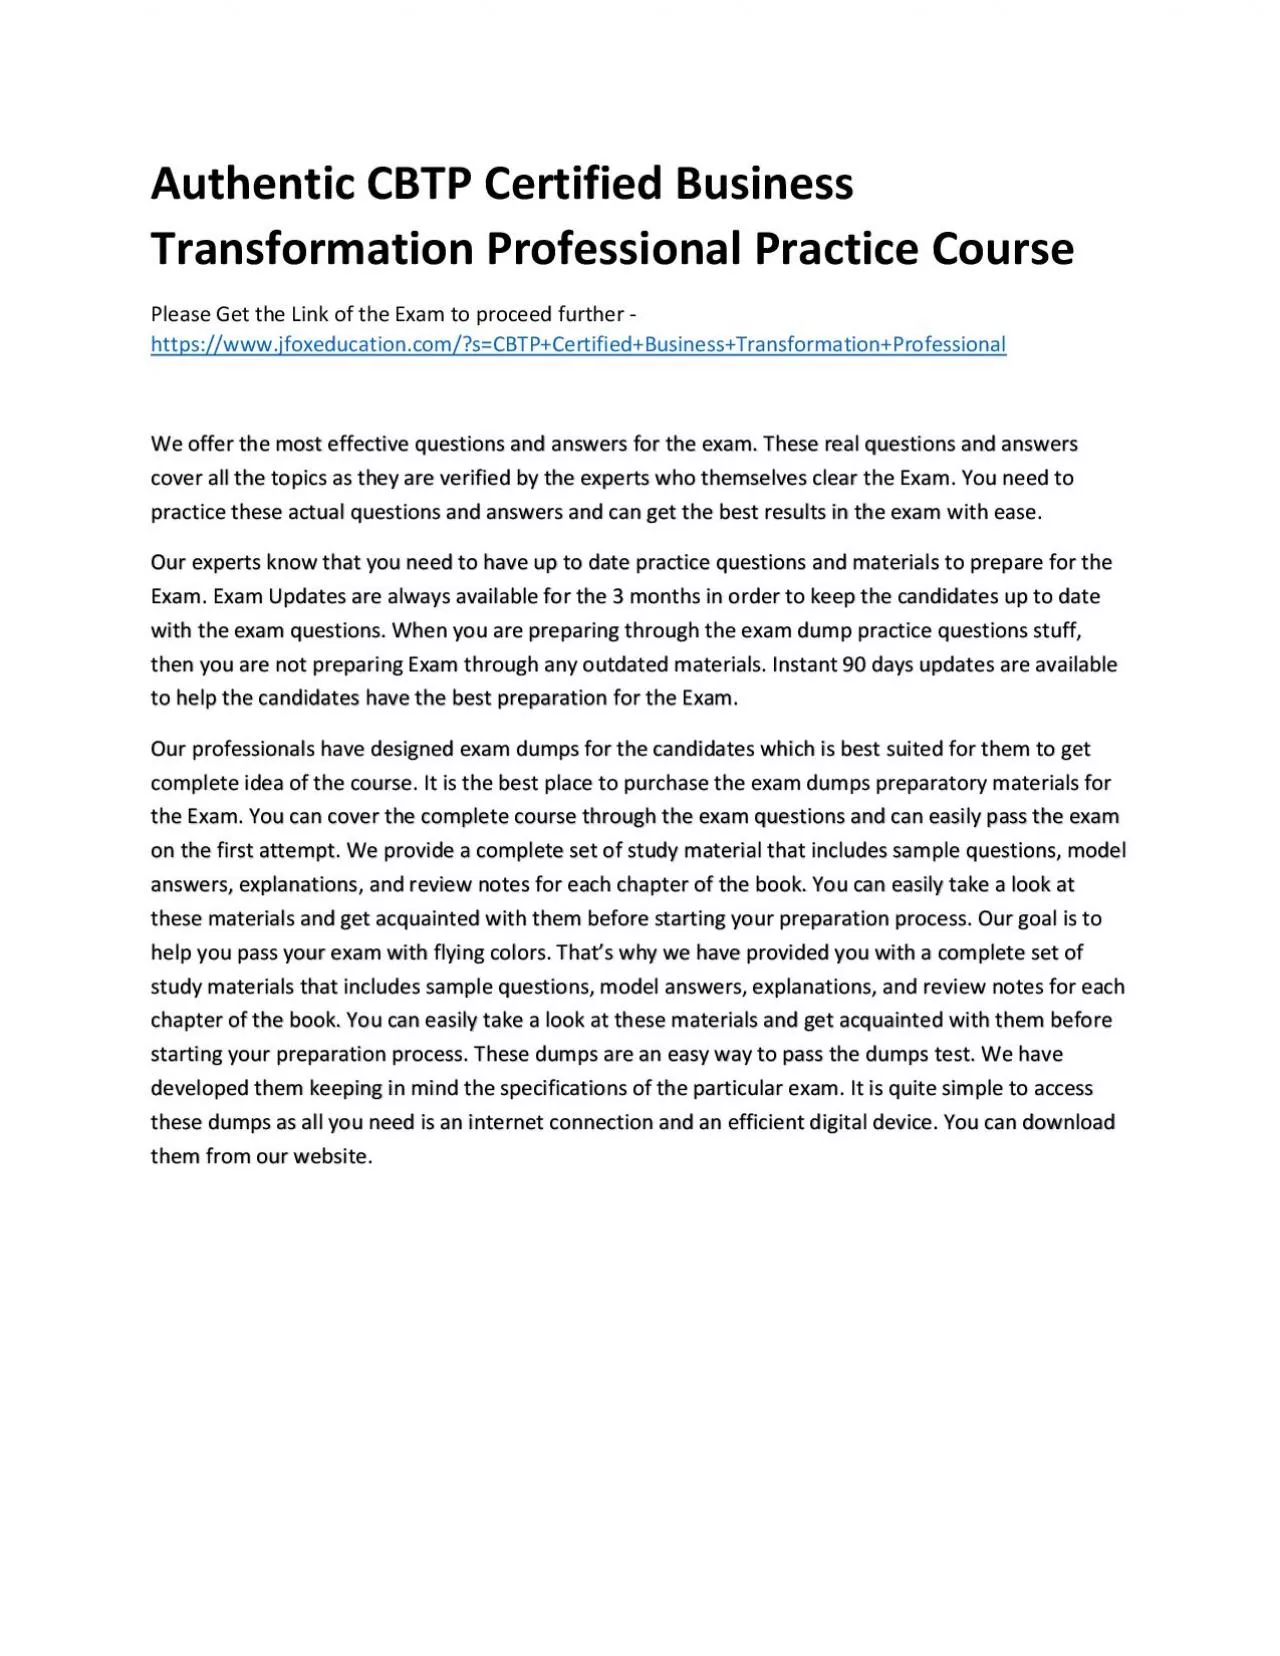 Authentic CBTP Certified Business Transformation Professional Practice Course